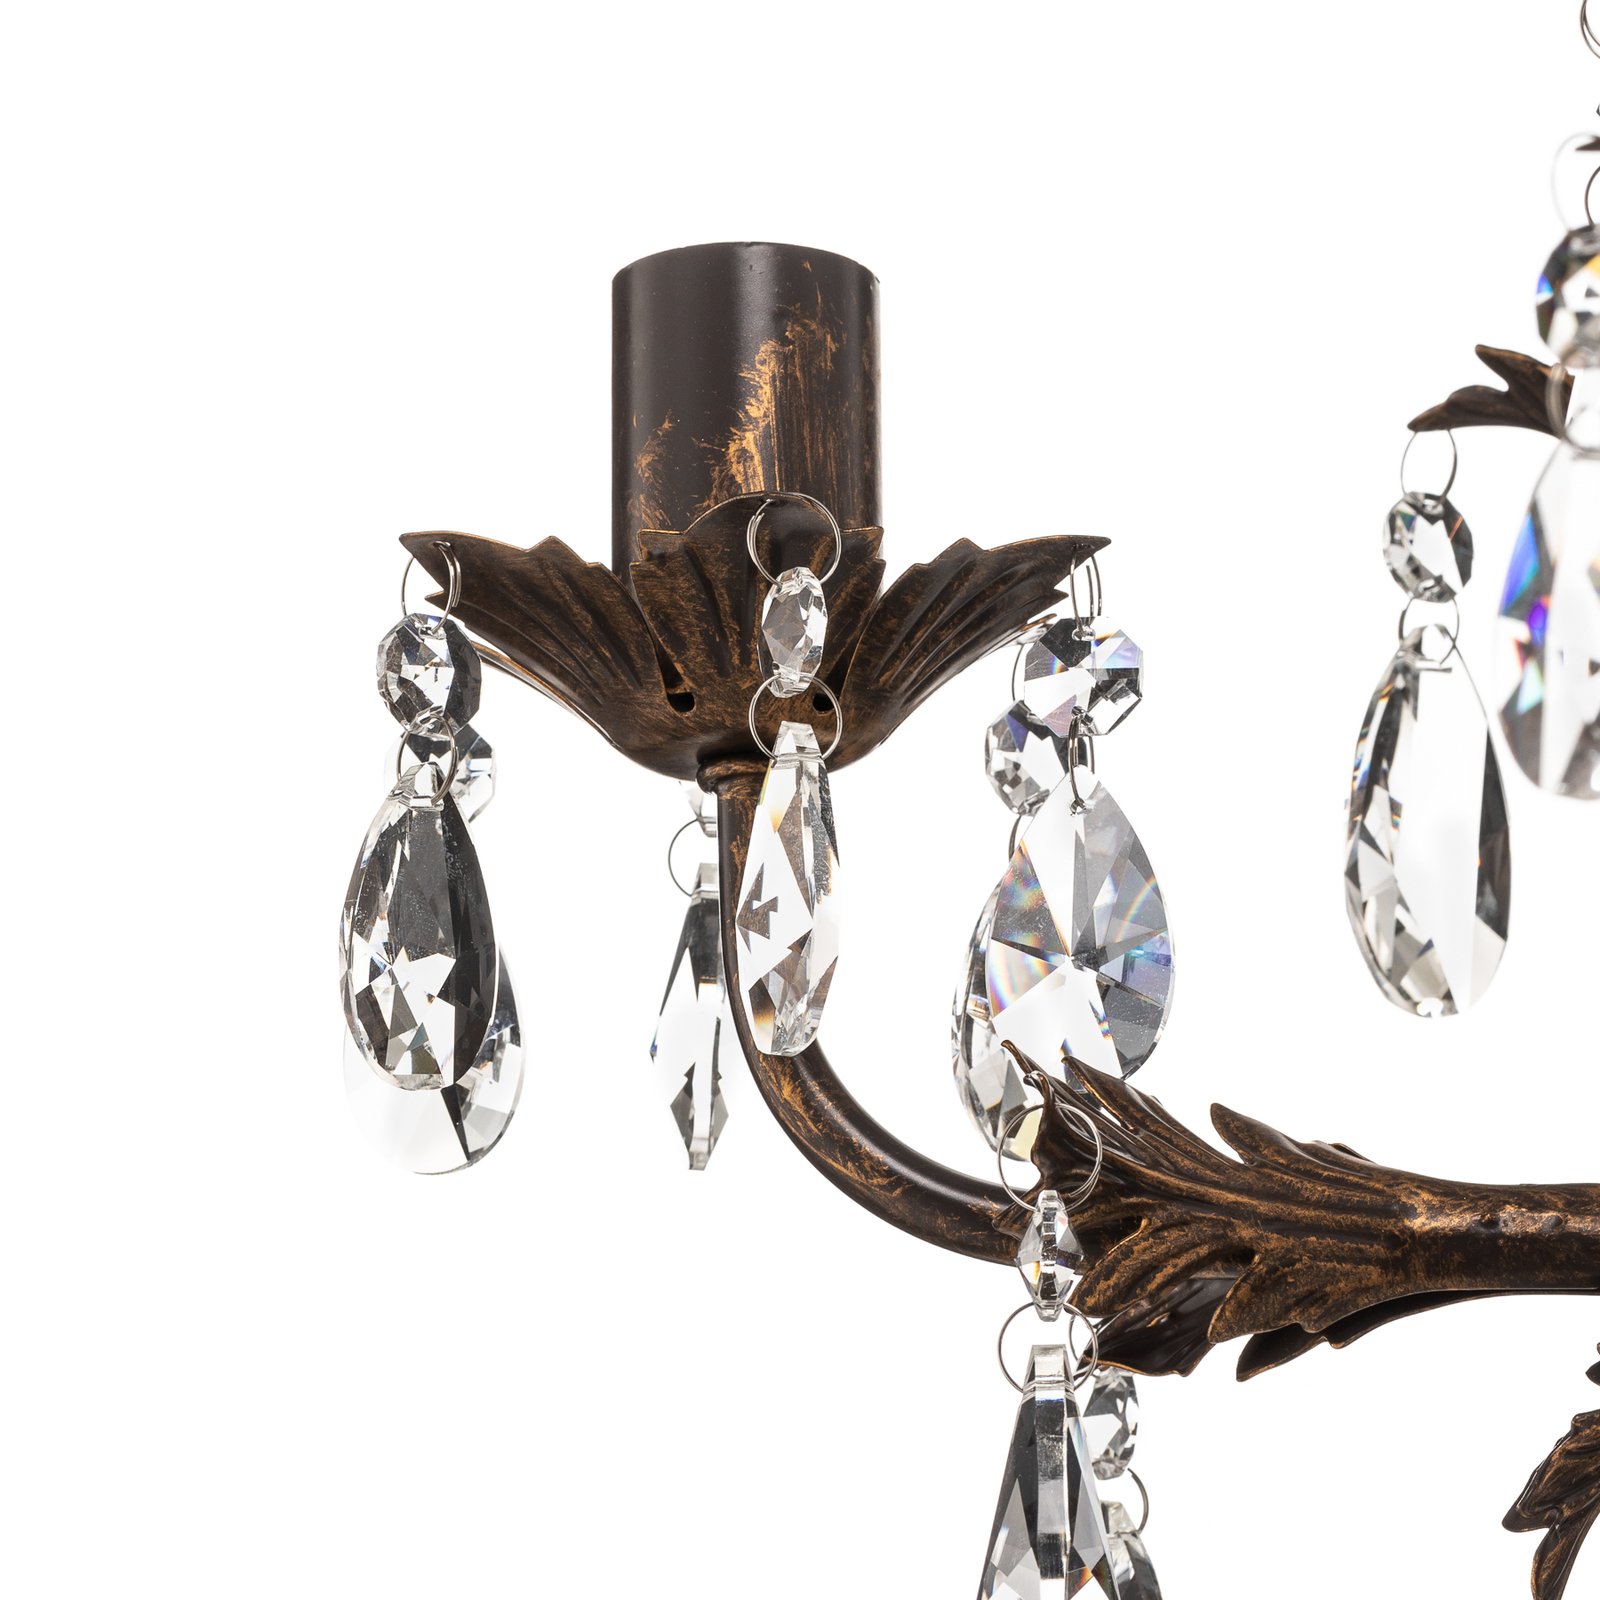 Teresa chandelier with crystals, 5-bulb